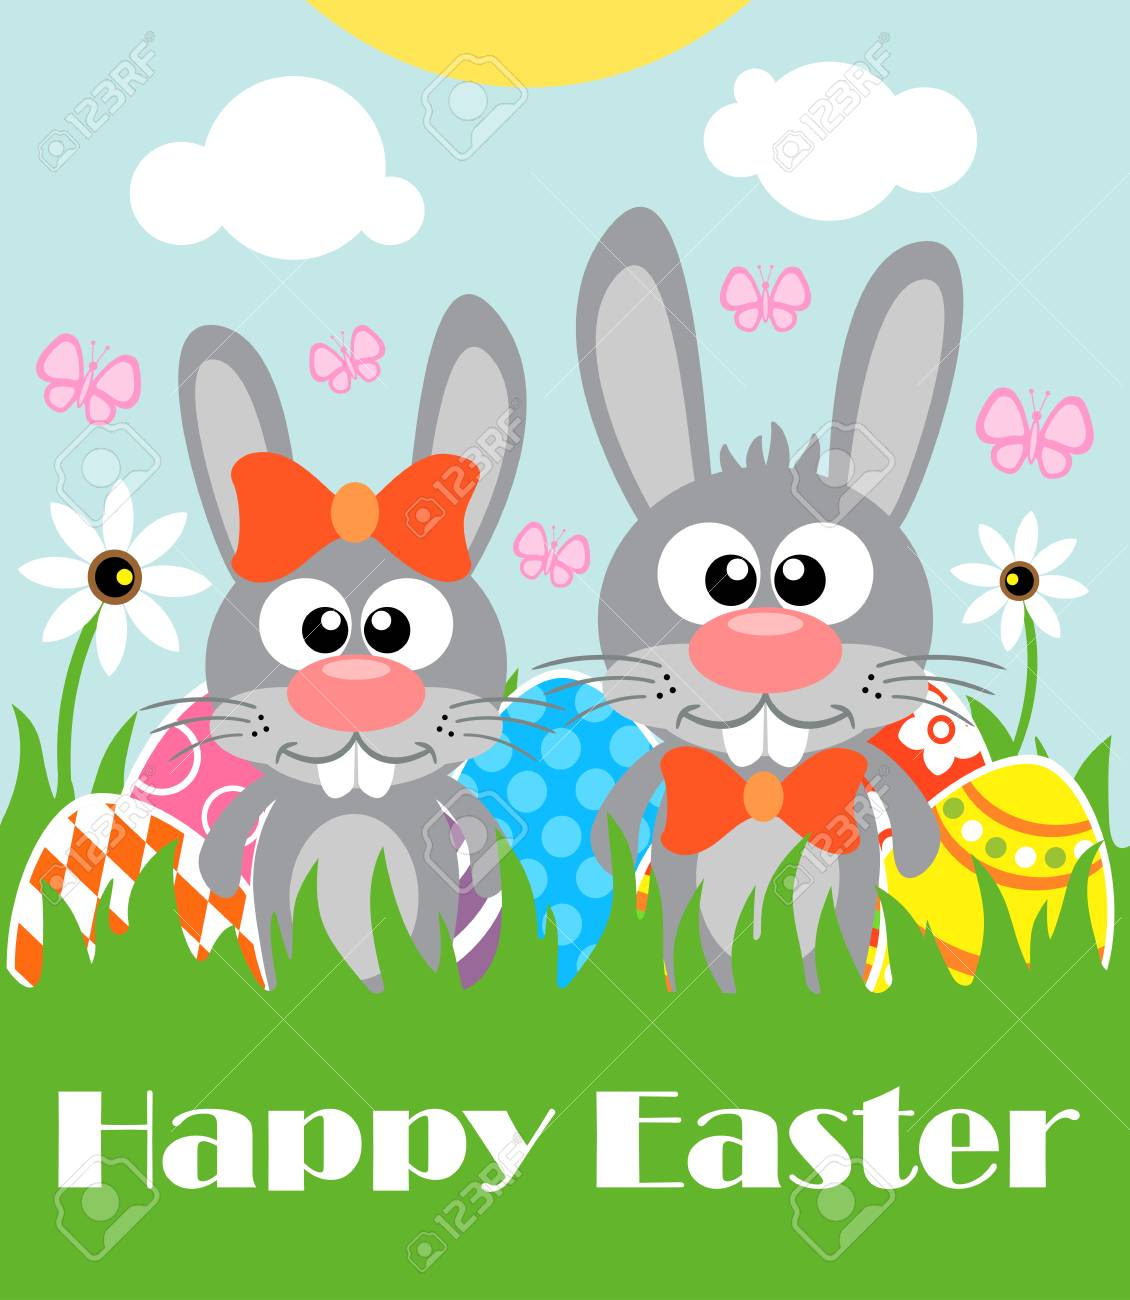 Happy Easter Background Card With Two Funny RabbitsVector